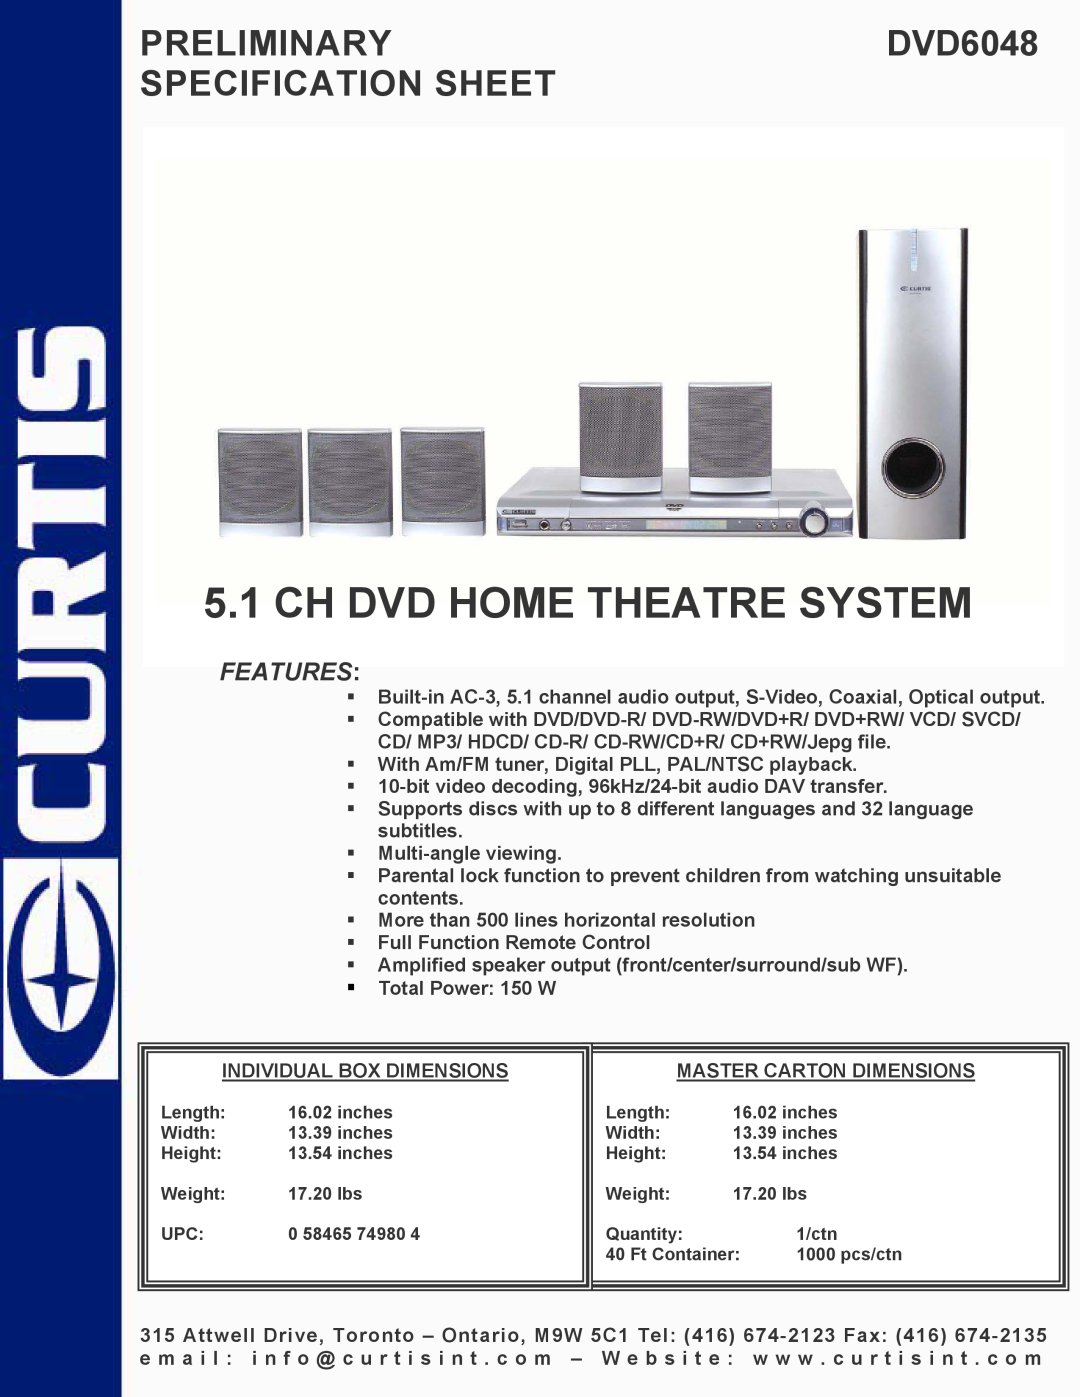 Curtis specifications Ch Dvd Home Theatre System, PRELIMINARYDVD6048 SPECIFICATION SHEET, Features 